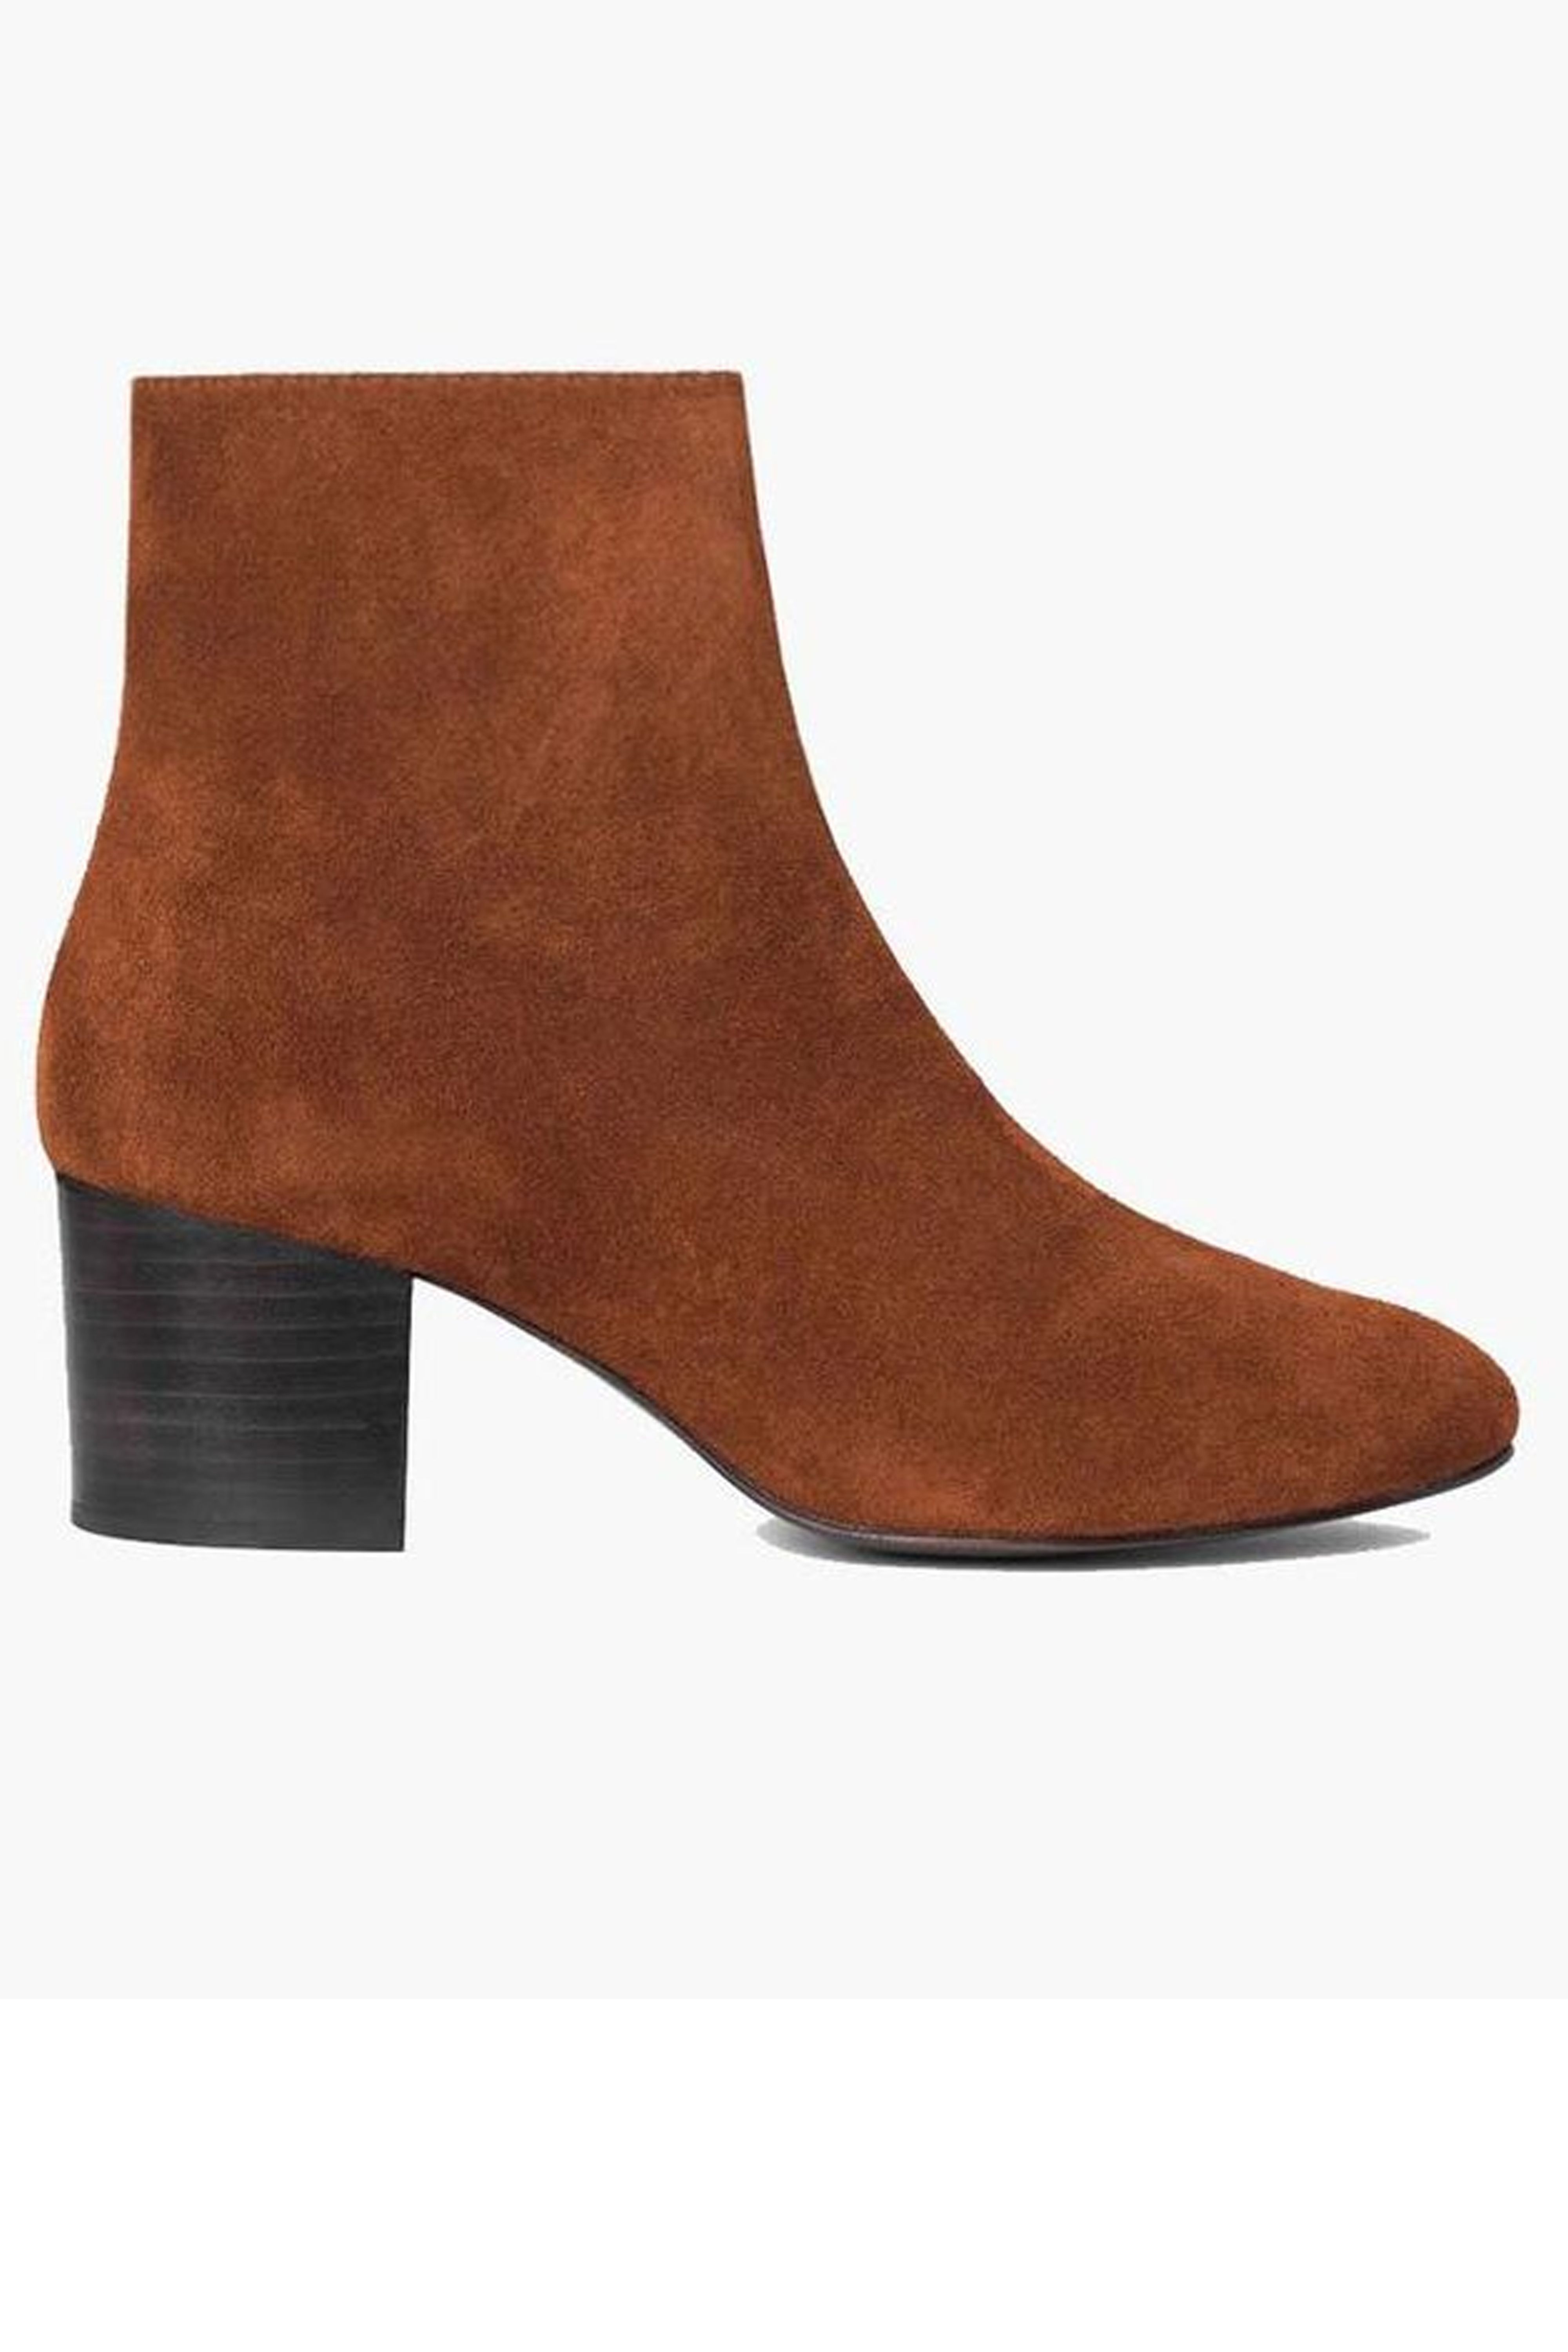 cute boots for fall 218